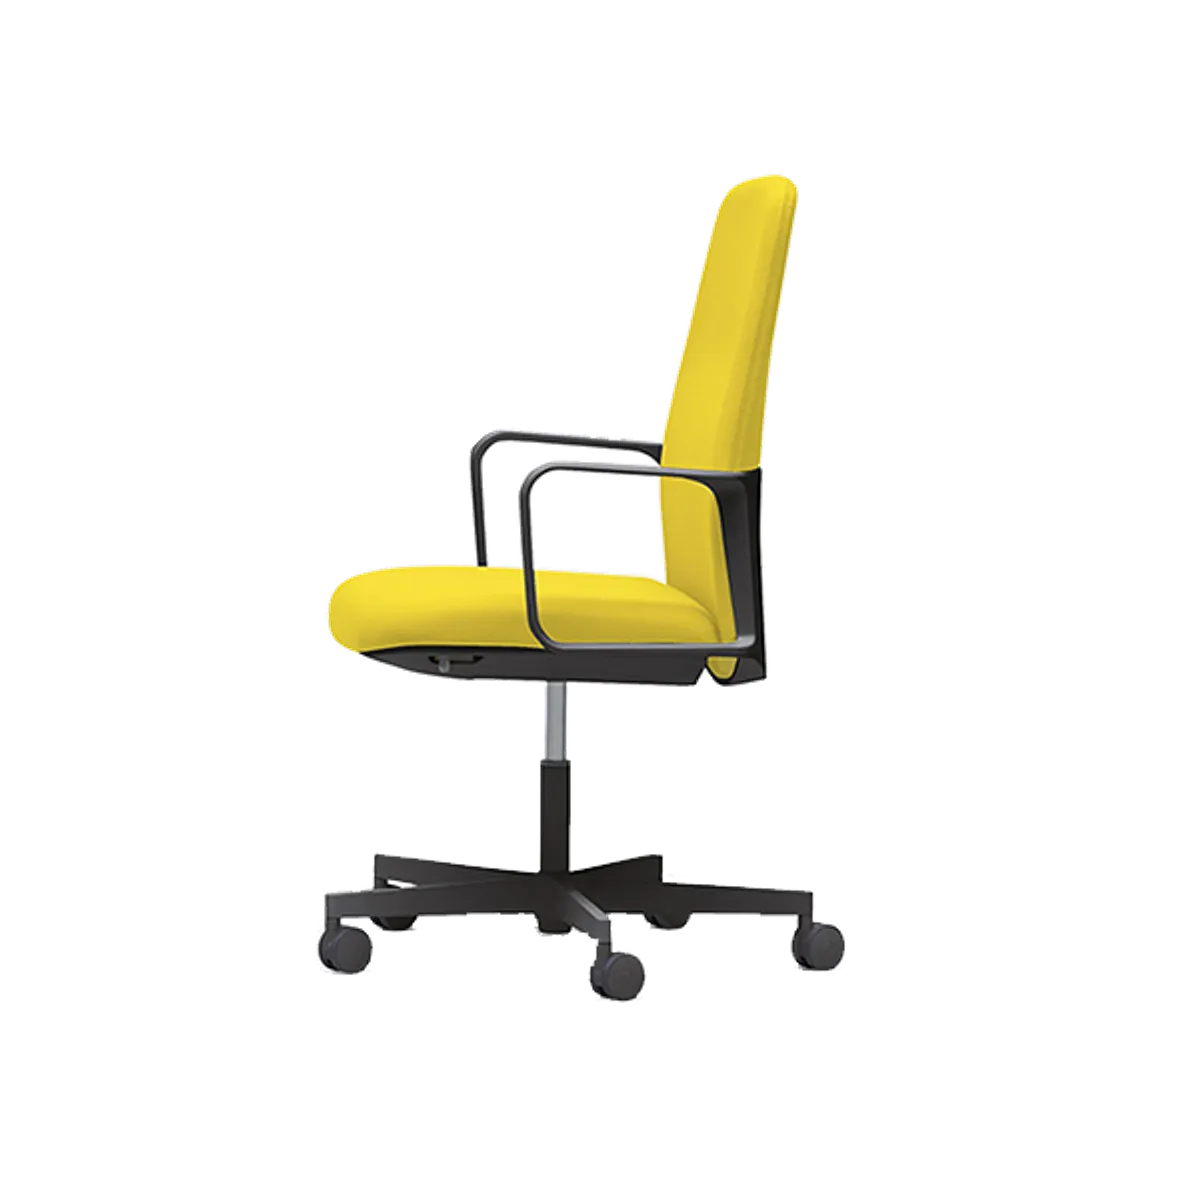 Temps Executive Office Chair Inside Out Contracts